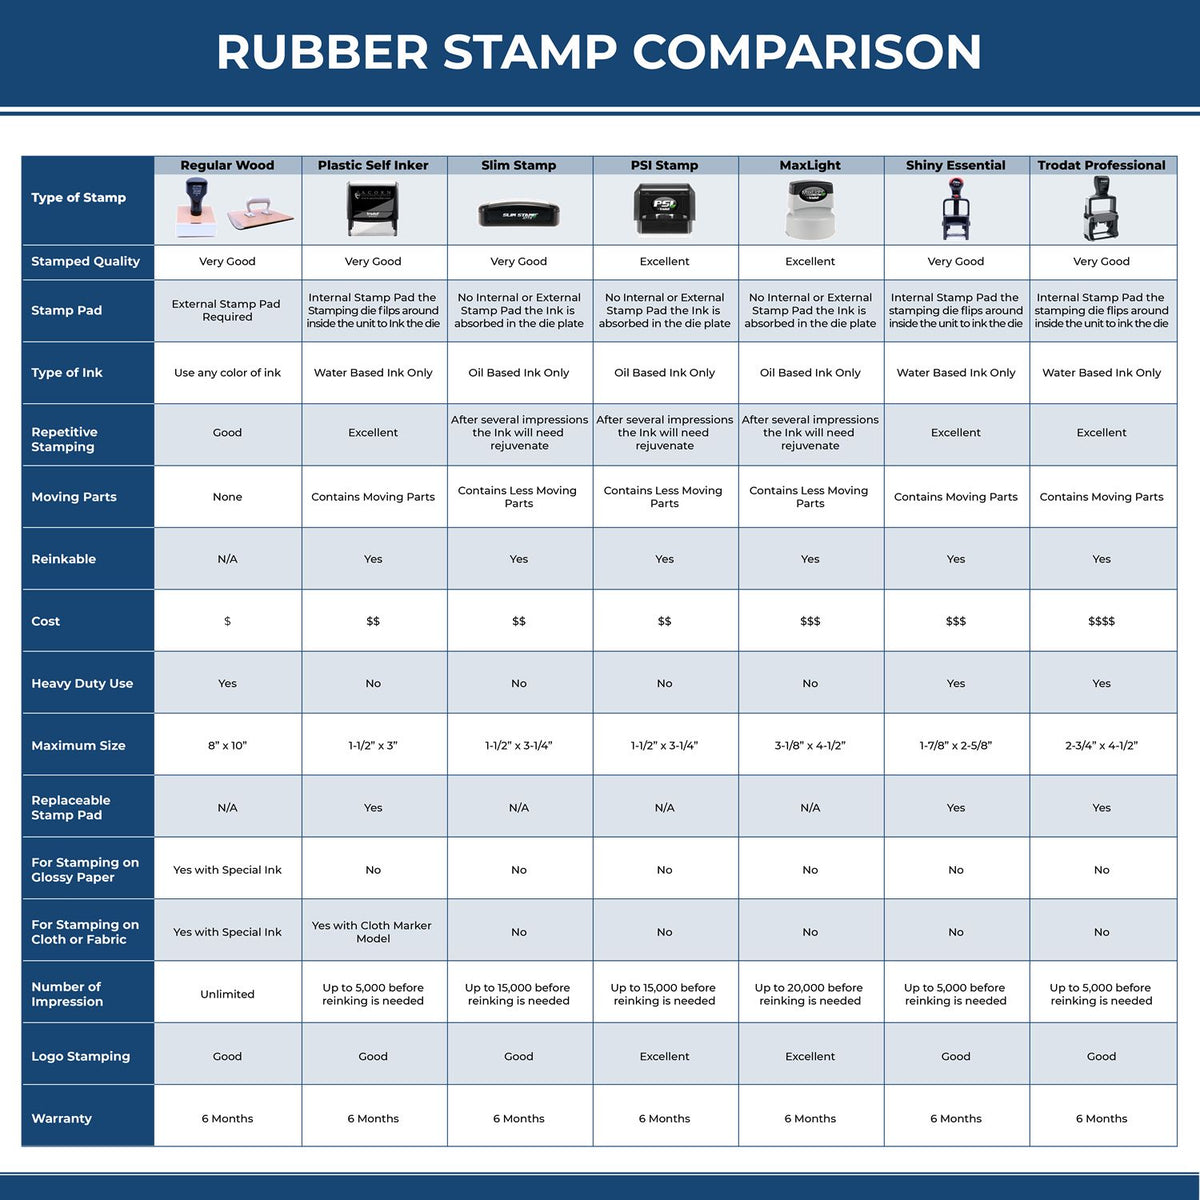 A comparison chart for the different types of mount models available for the PSI Florida Notary Stamp.